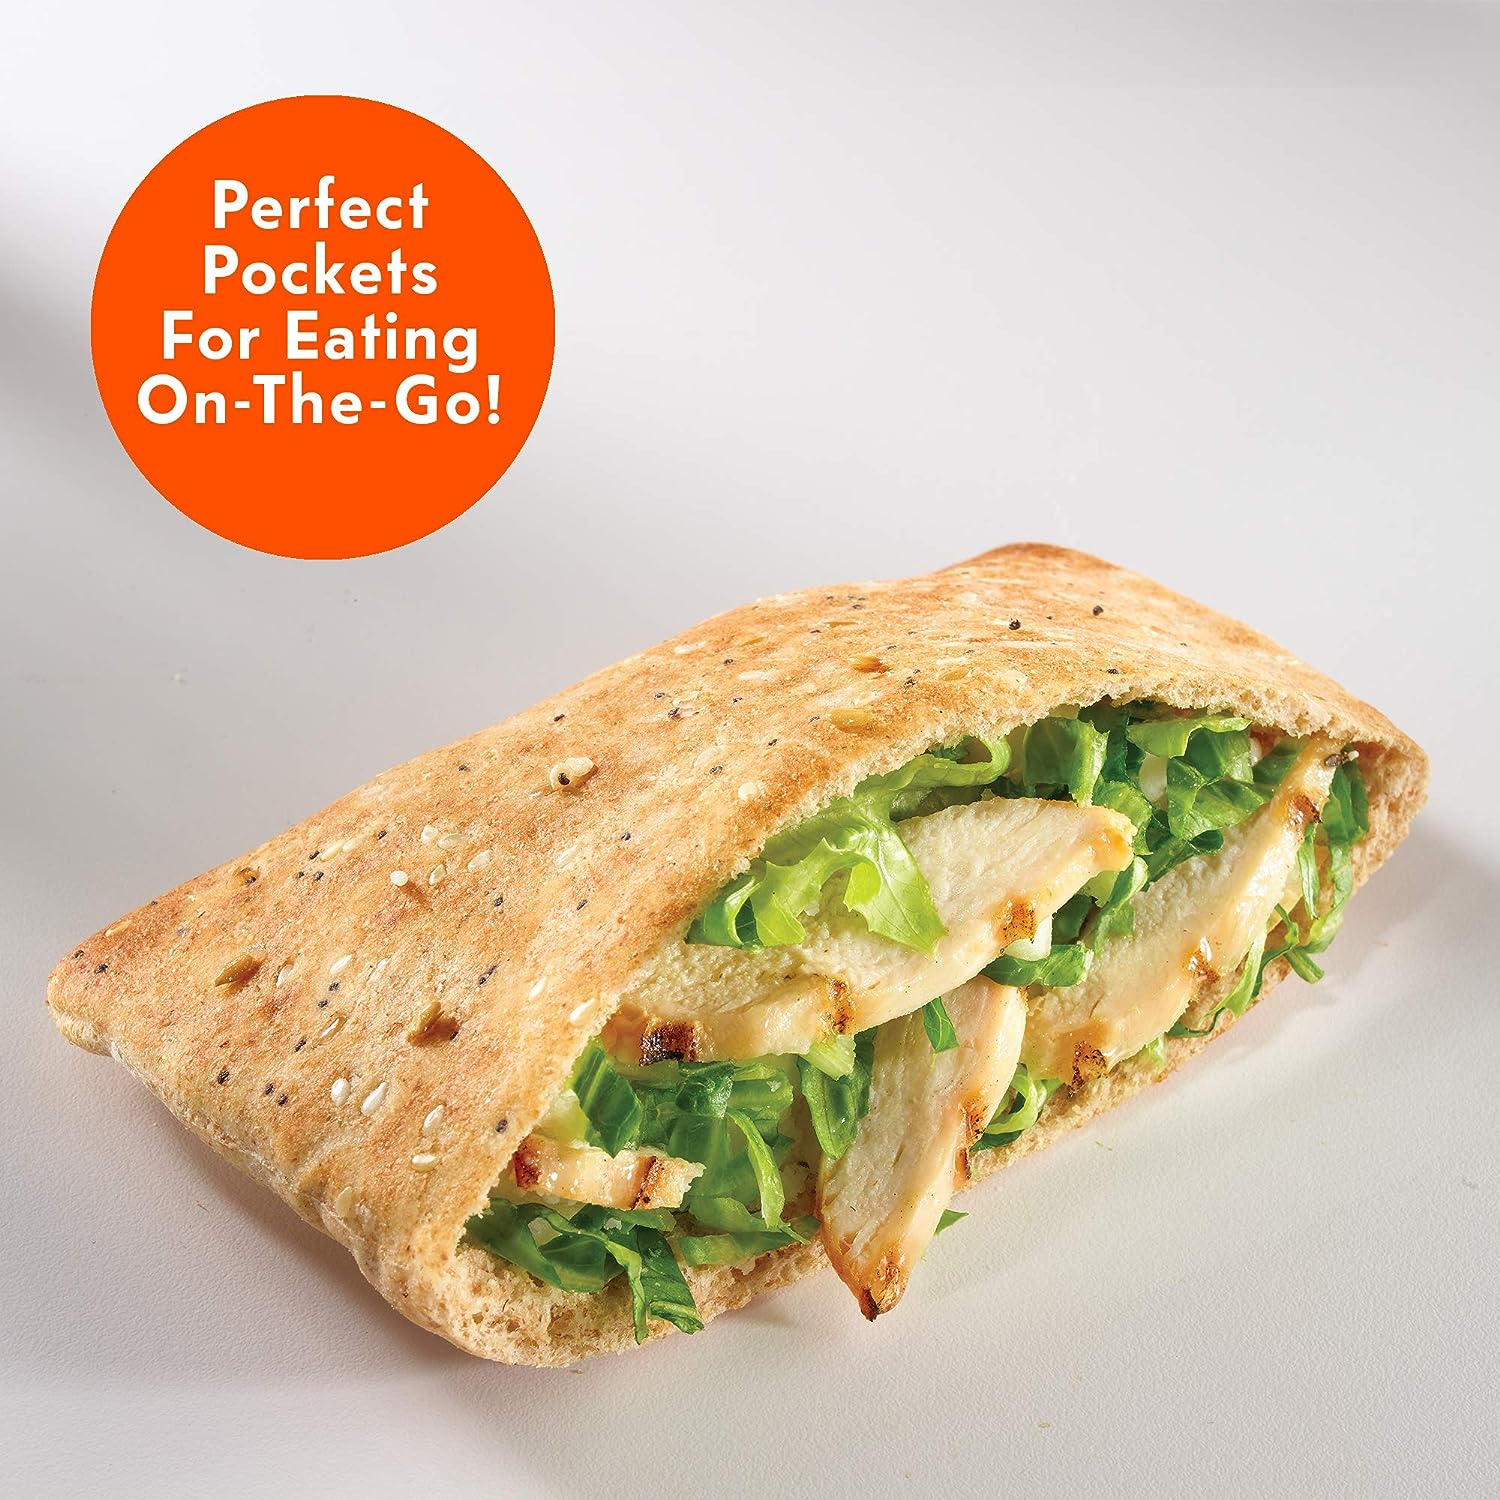 A Toufayan sandwich or a pocket for on the go